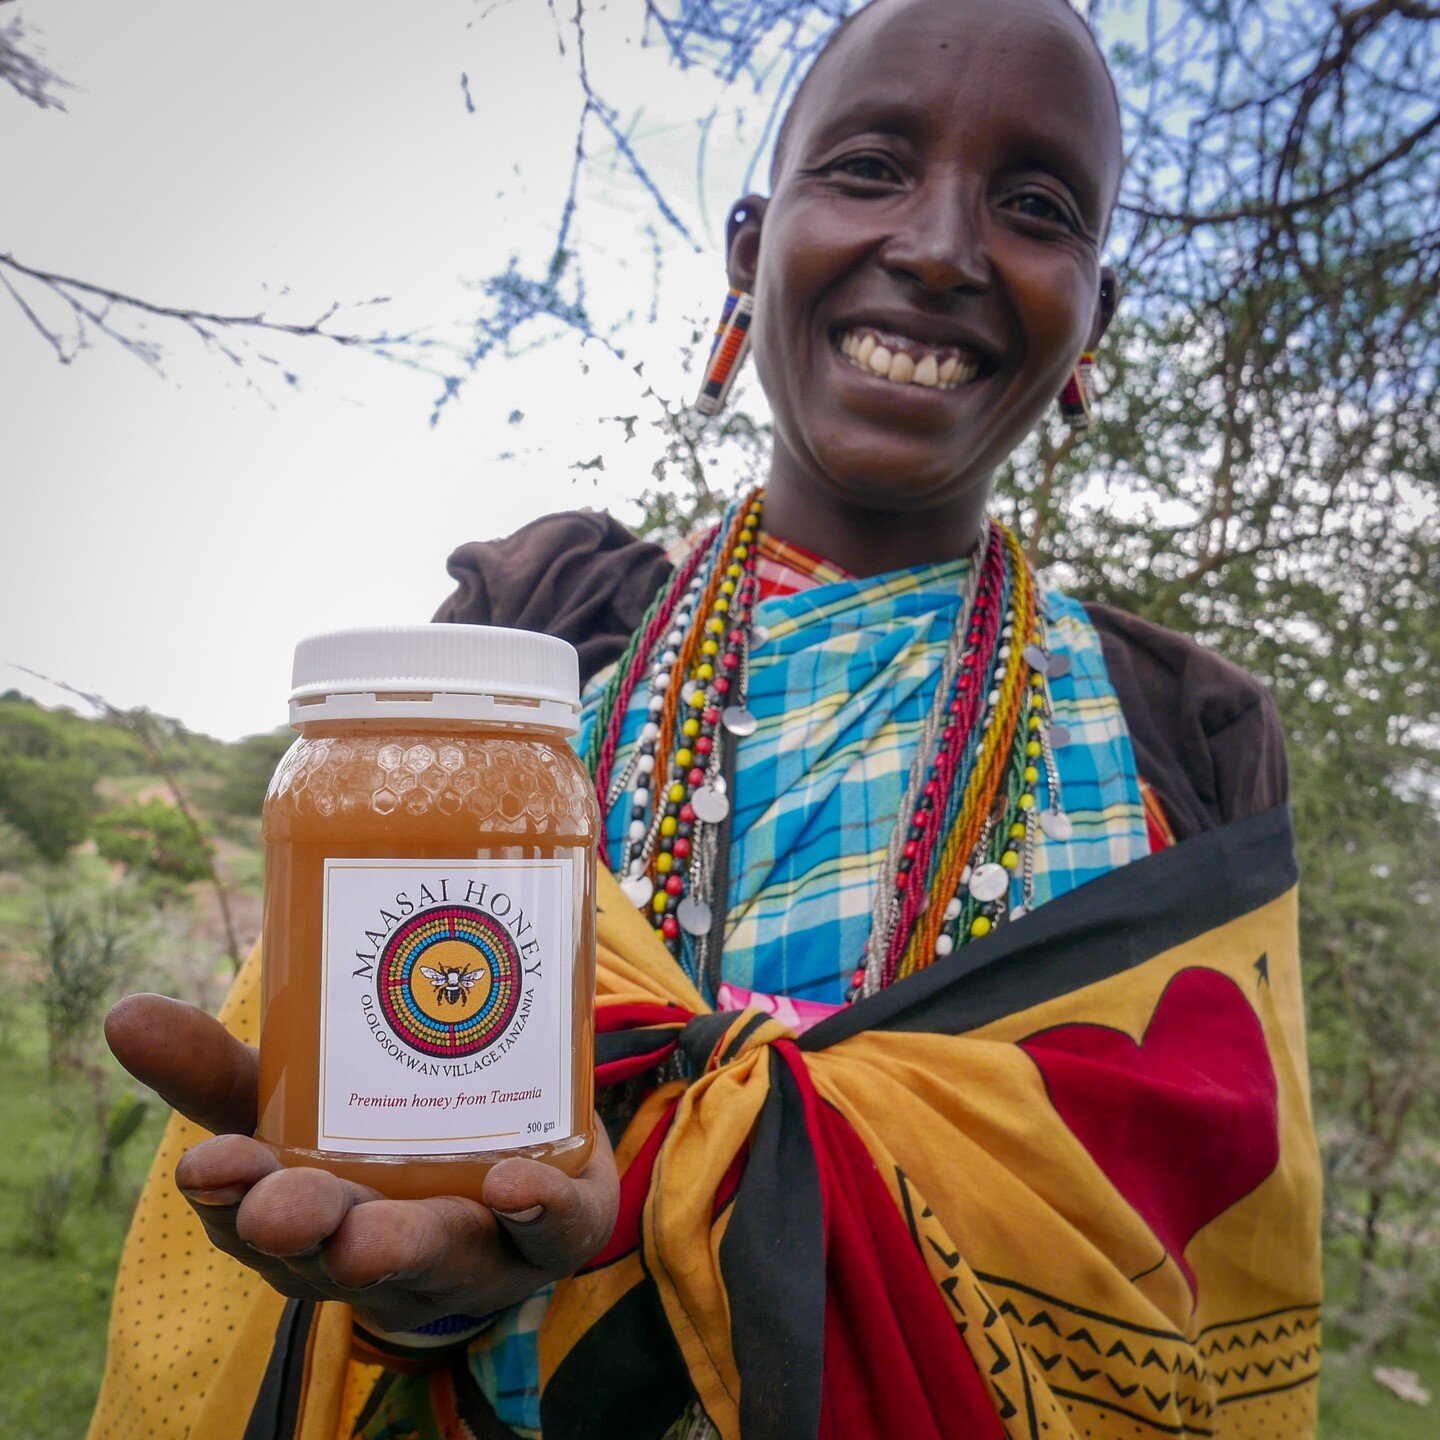 Tomorrow 13th May 2023, please visit us at #Njiro farmers market for our products. We have premium organic honey (Stingless and Stinging honeybees honey (Maasai honey)) originated from Ololosokwan village near Serengeti national park as well as premi